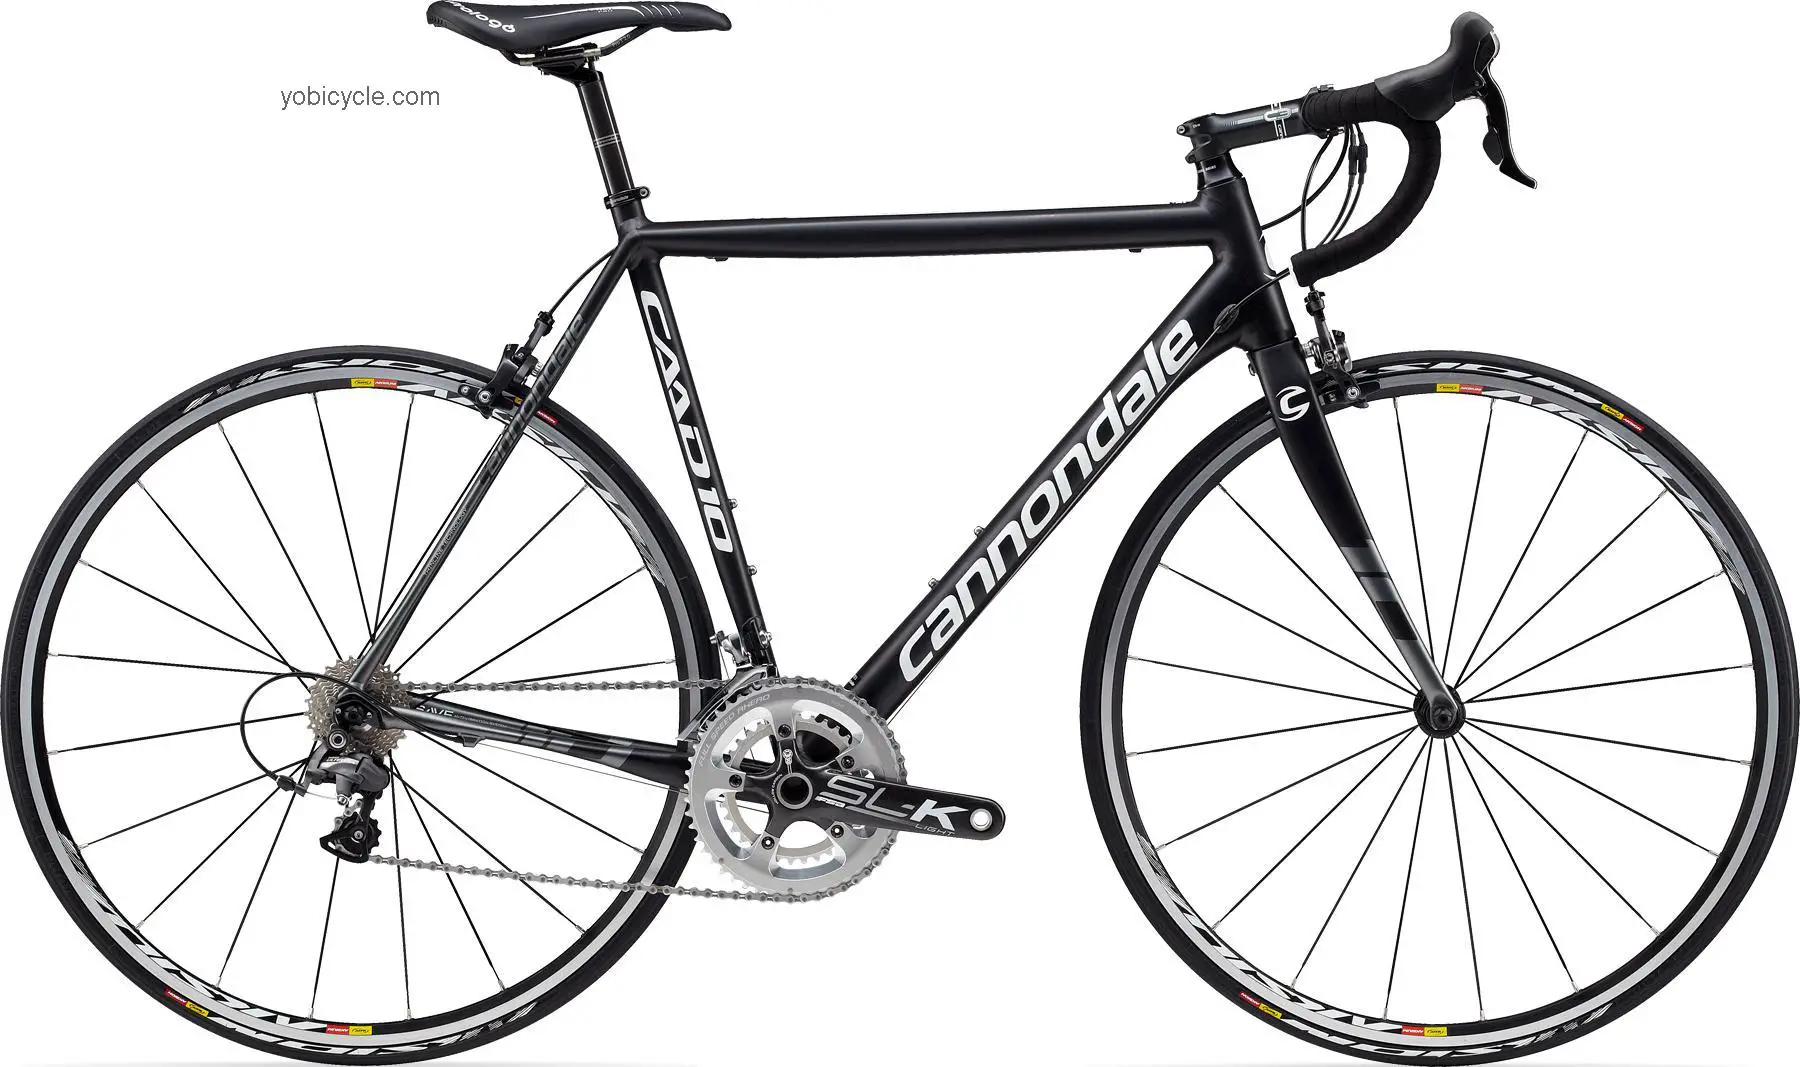 Cannondale CAAD10 3 Ultegra 2012 comparison online with competitors